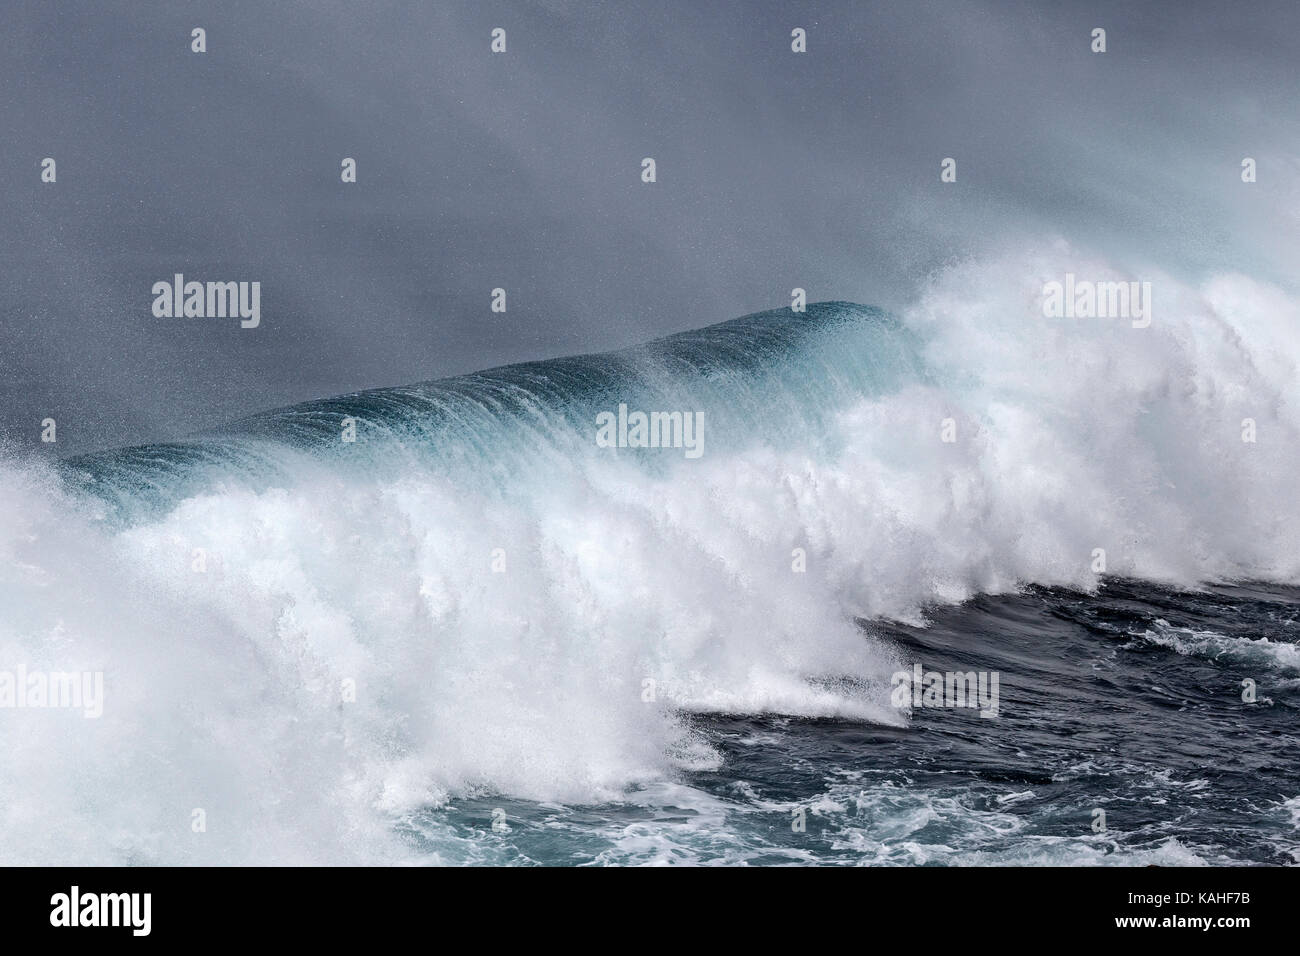 Breaking waves, strong swell, spray, Faial Island, Azores, Portugal Stock Photo